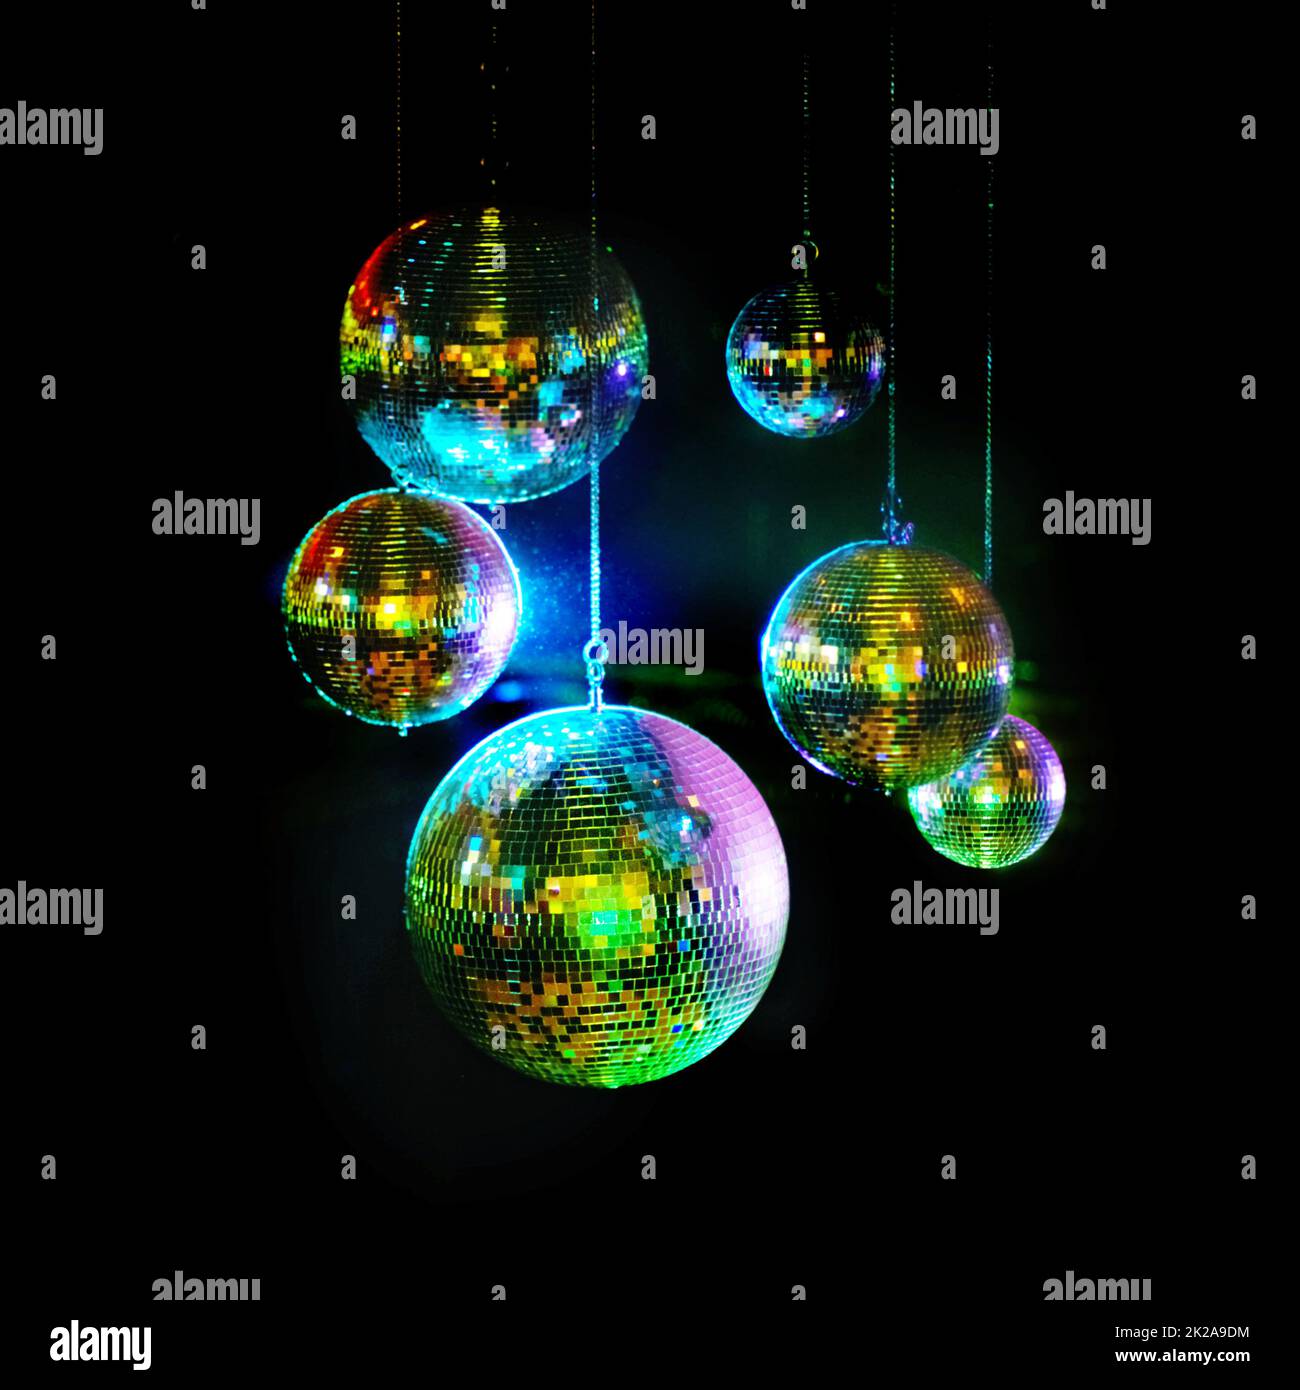 Mirror balls above dance floors. Awesome image of kaleidoscopic-looking disco balls hanging against a black background. Stock Photo